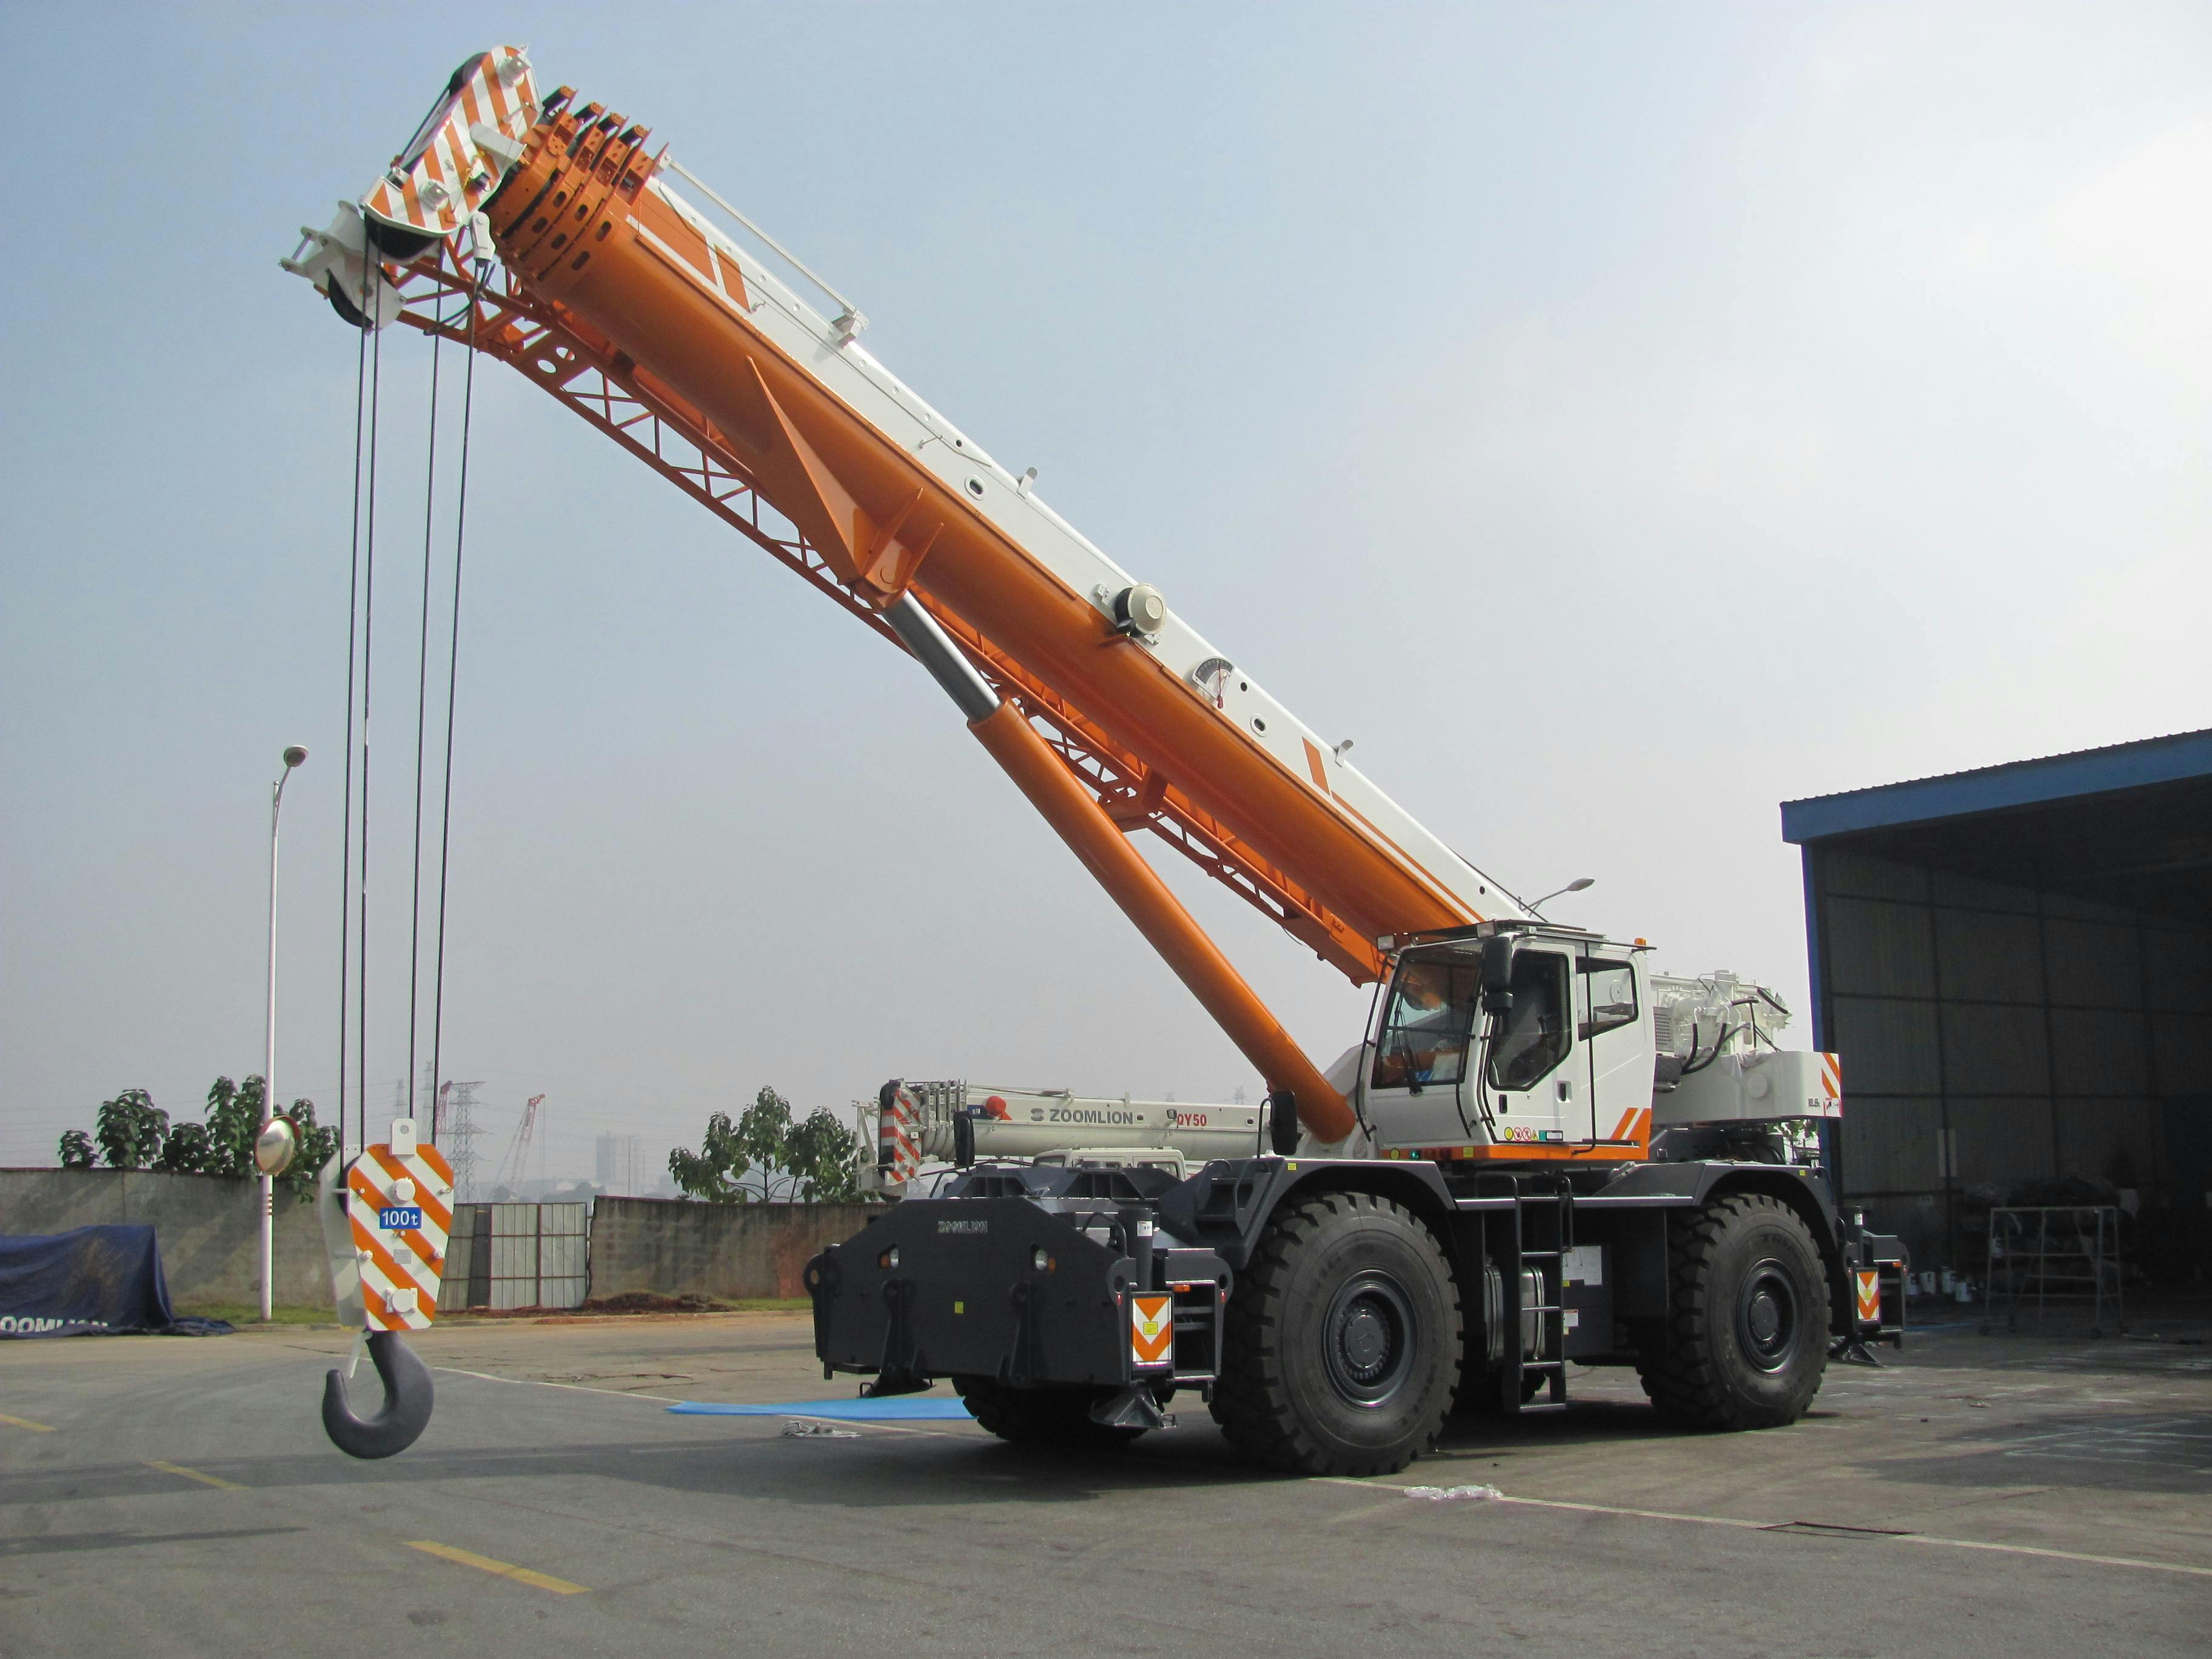 Global Crane Sales Ships First RT100 Unit Worldwide | Daily Construction News